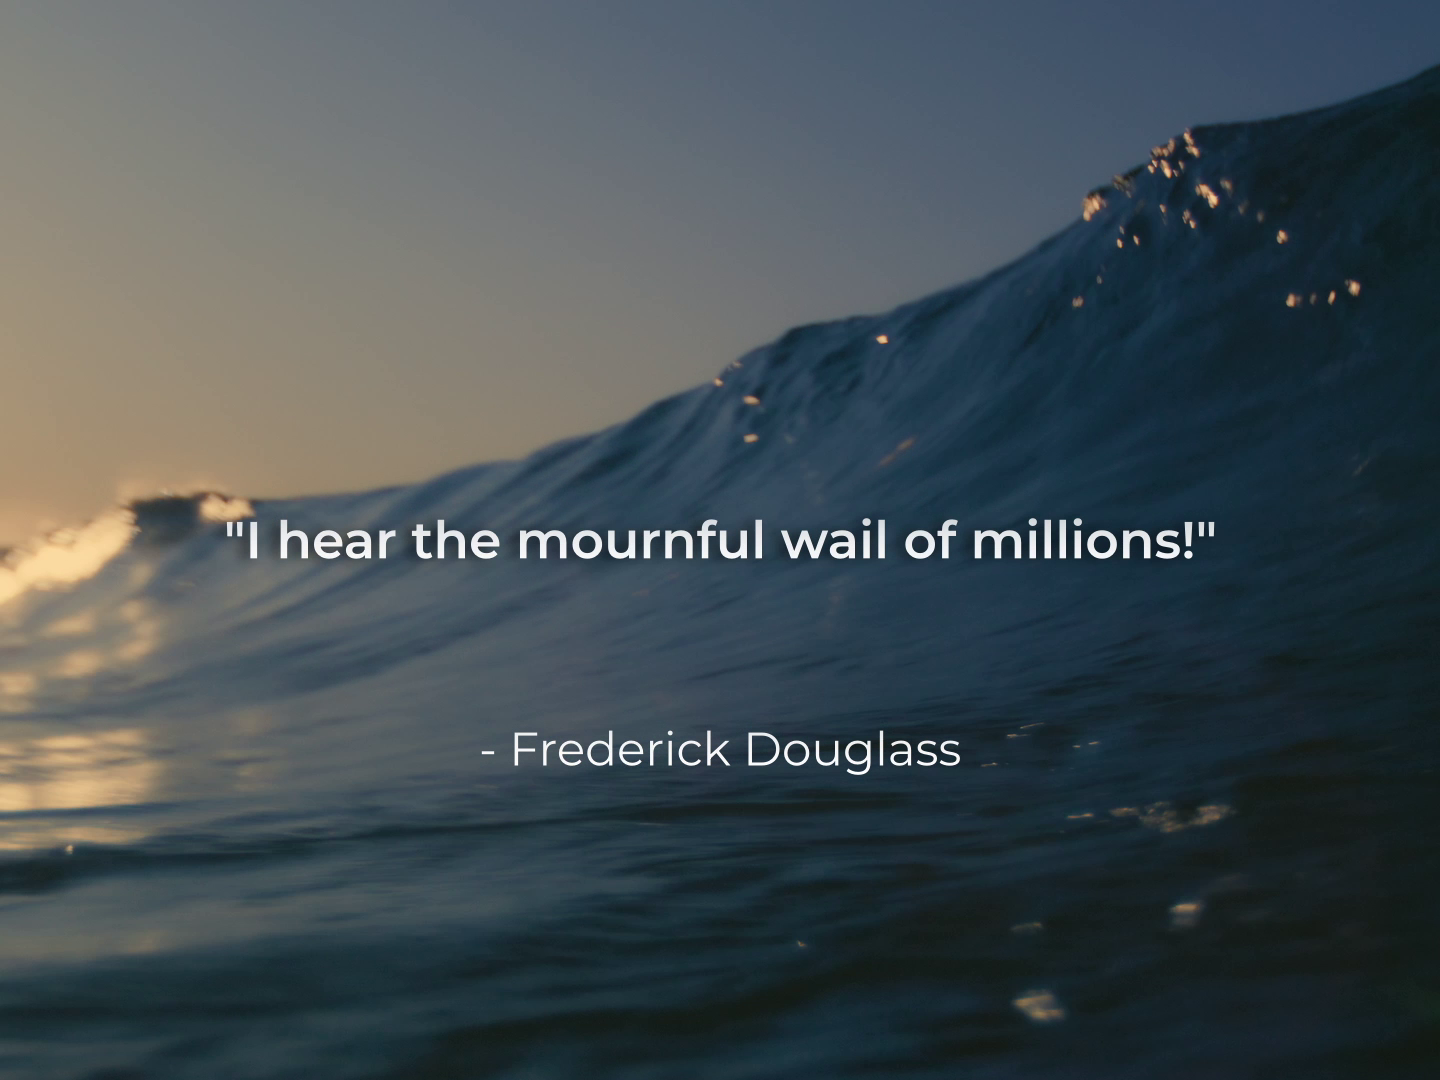 Frederick Douglass quote with an ocean background